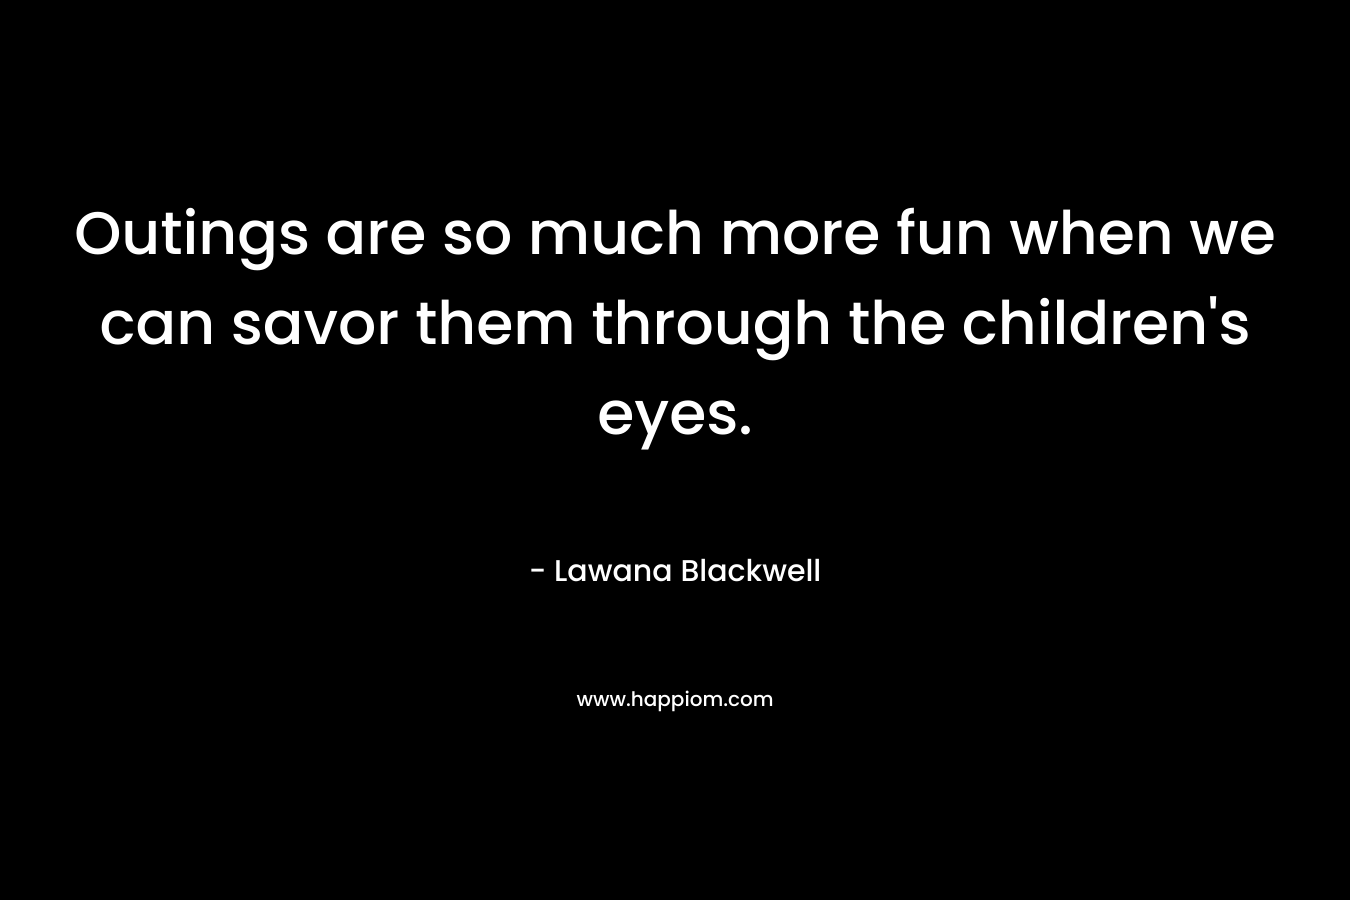 Outings are so much more fun when we can savor them through the children’s eyes. – Lawana Blackwell